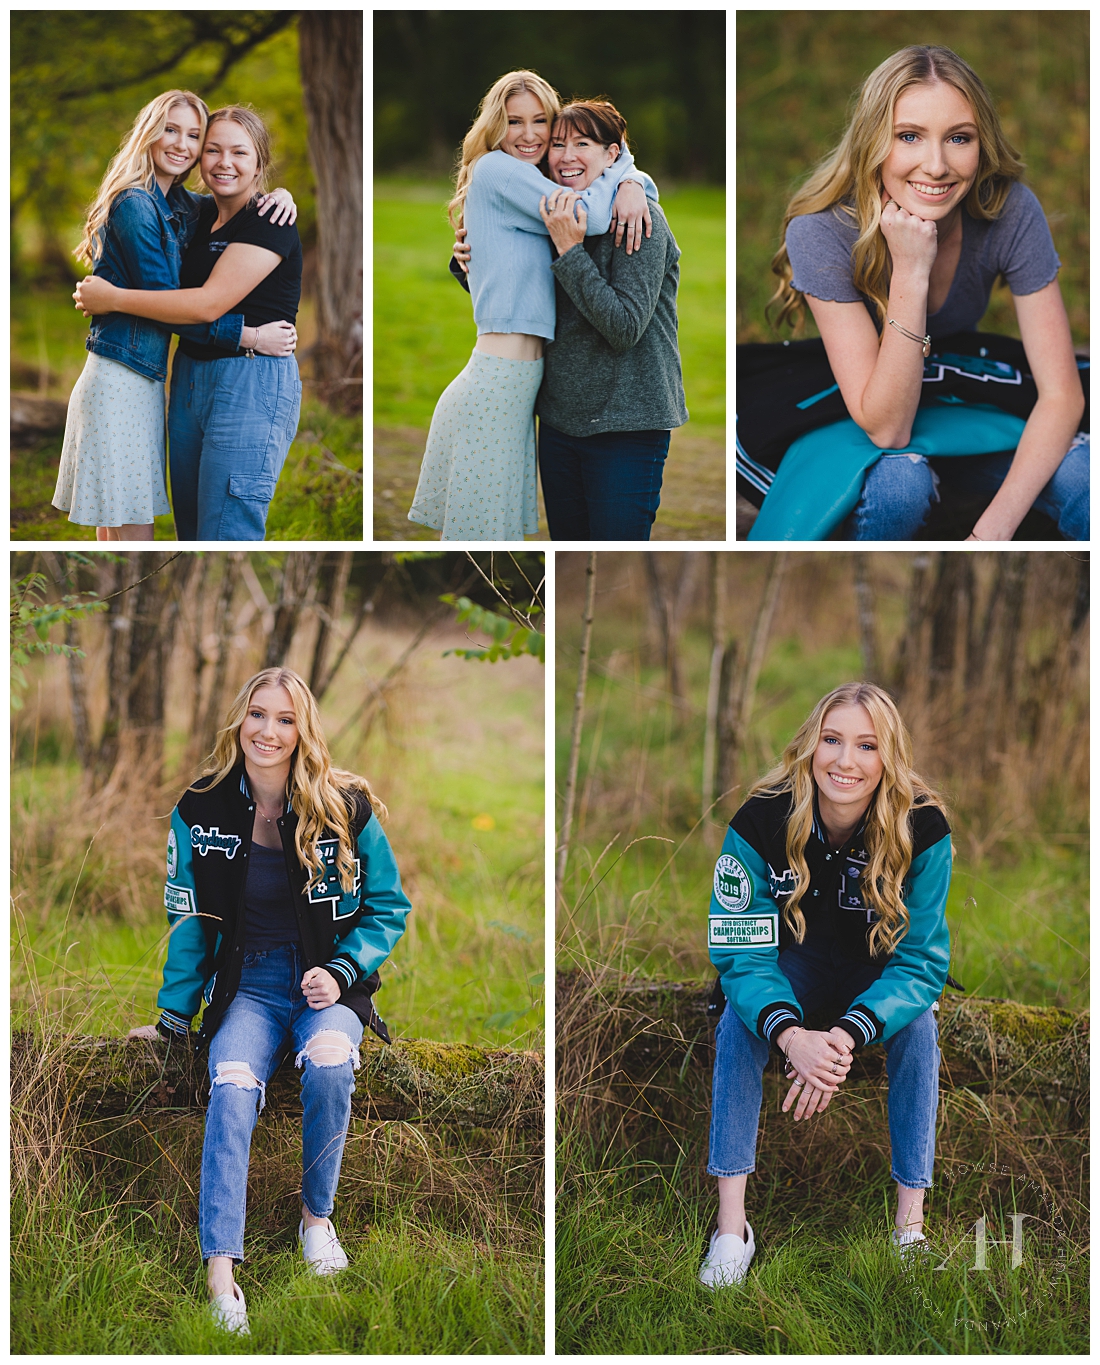 Senior Portraits with Parents and Friends | Senior Portraits with a Letter Jacket, Athletic Senior Portraits | Photographed by Amanda Howse Photography, Tacoma's Best Senior Photographer